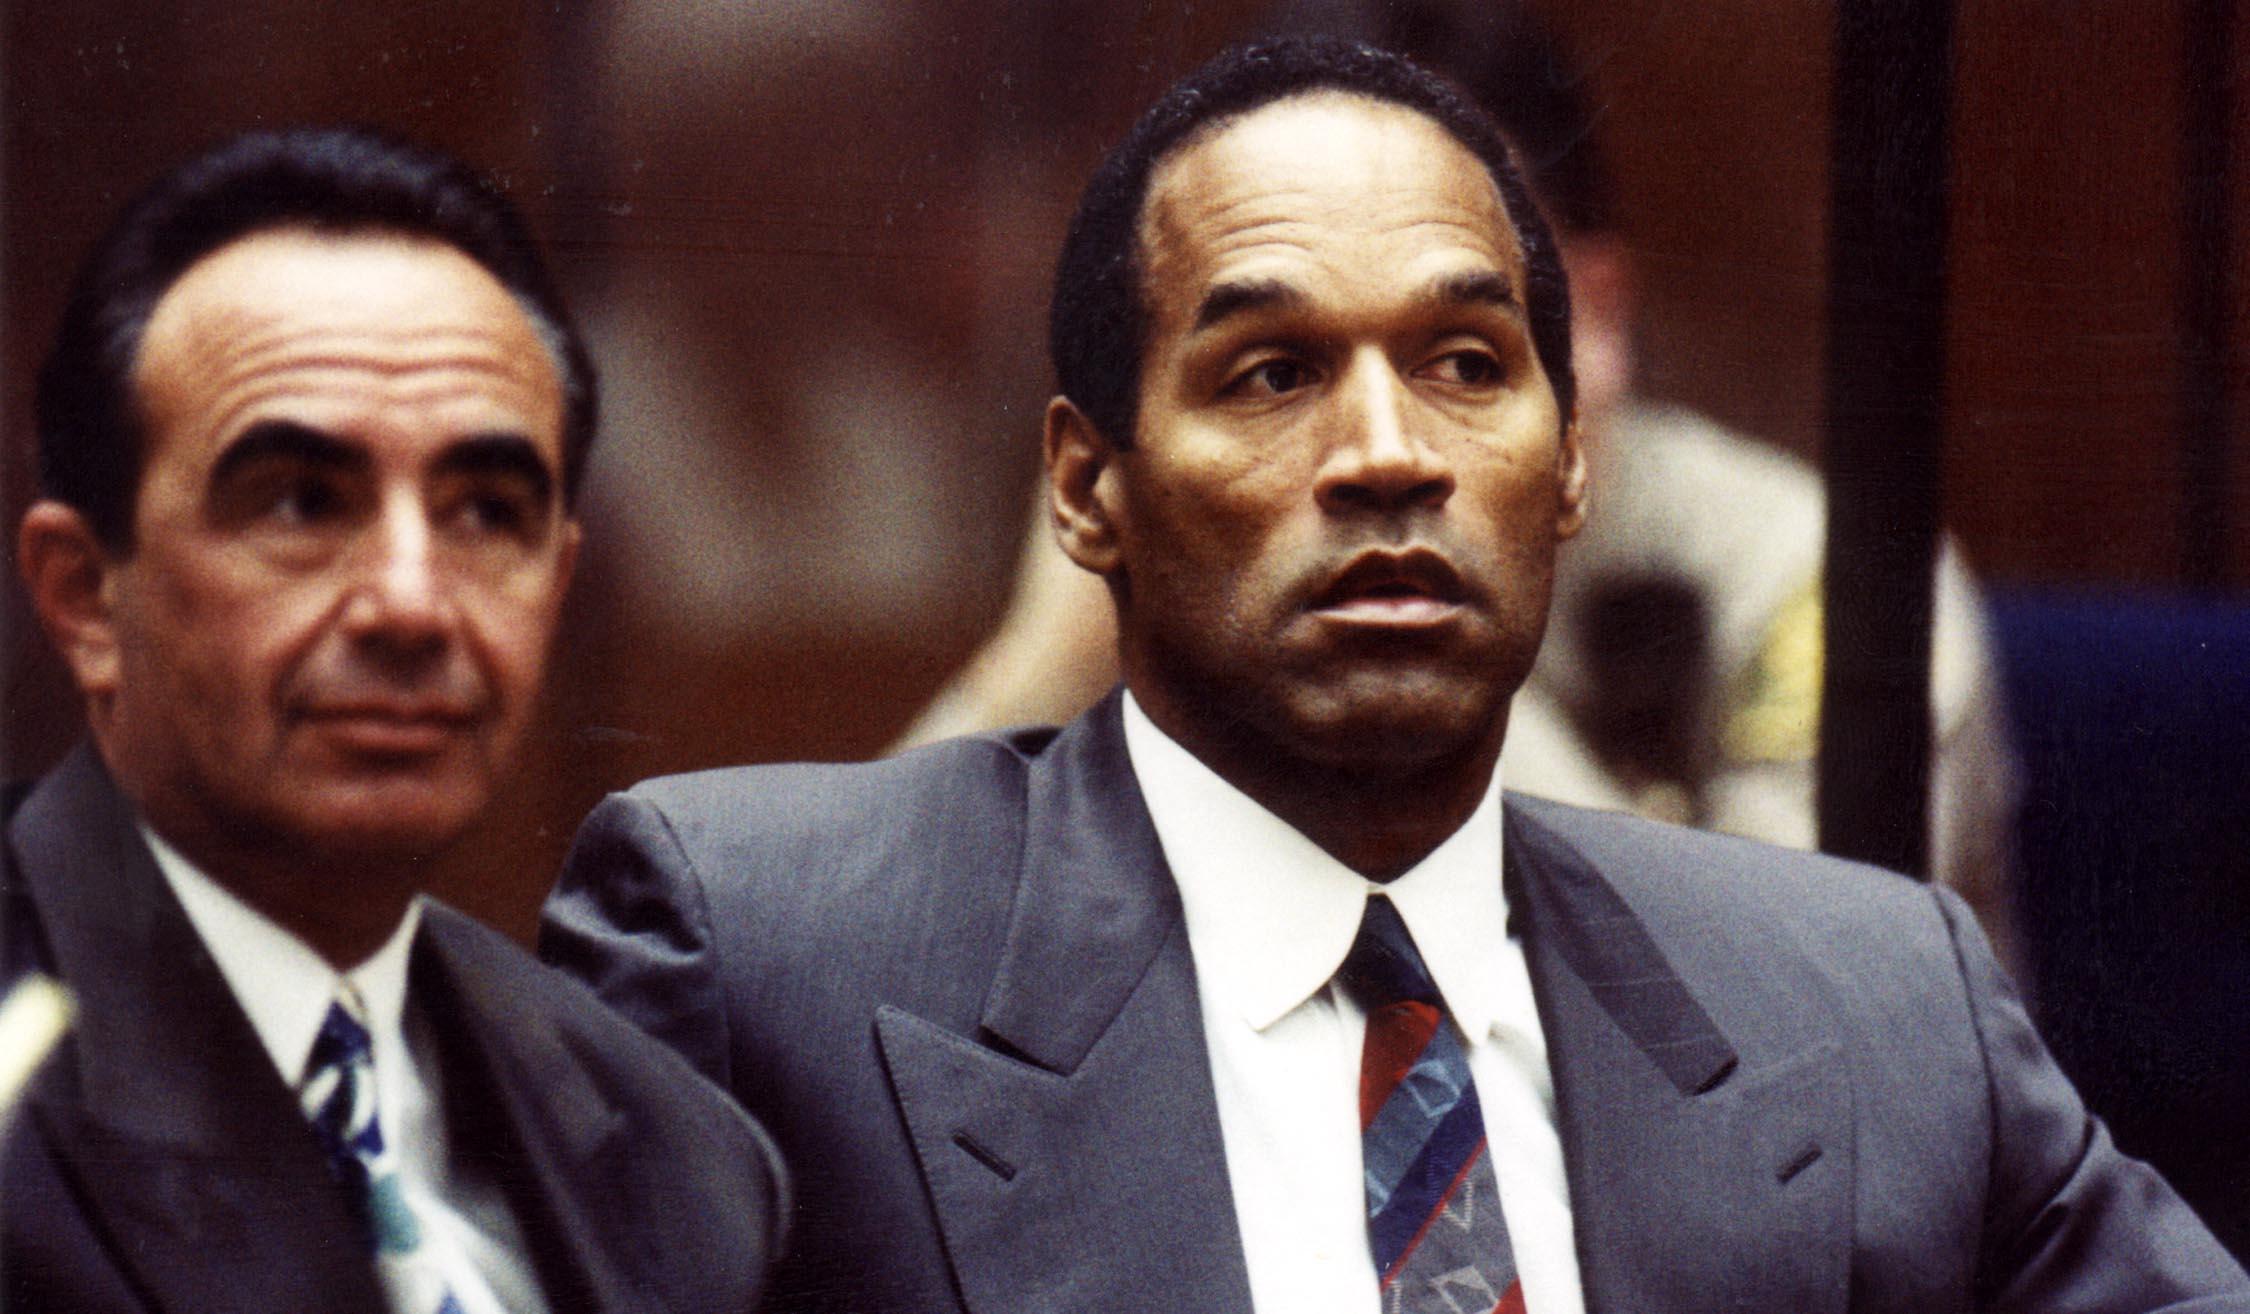 OJ Simpson in the courtroom